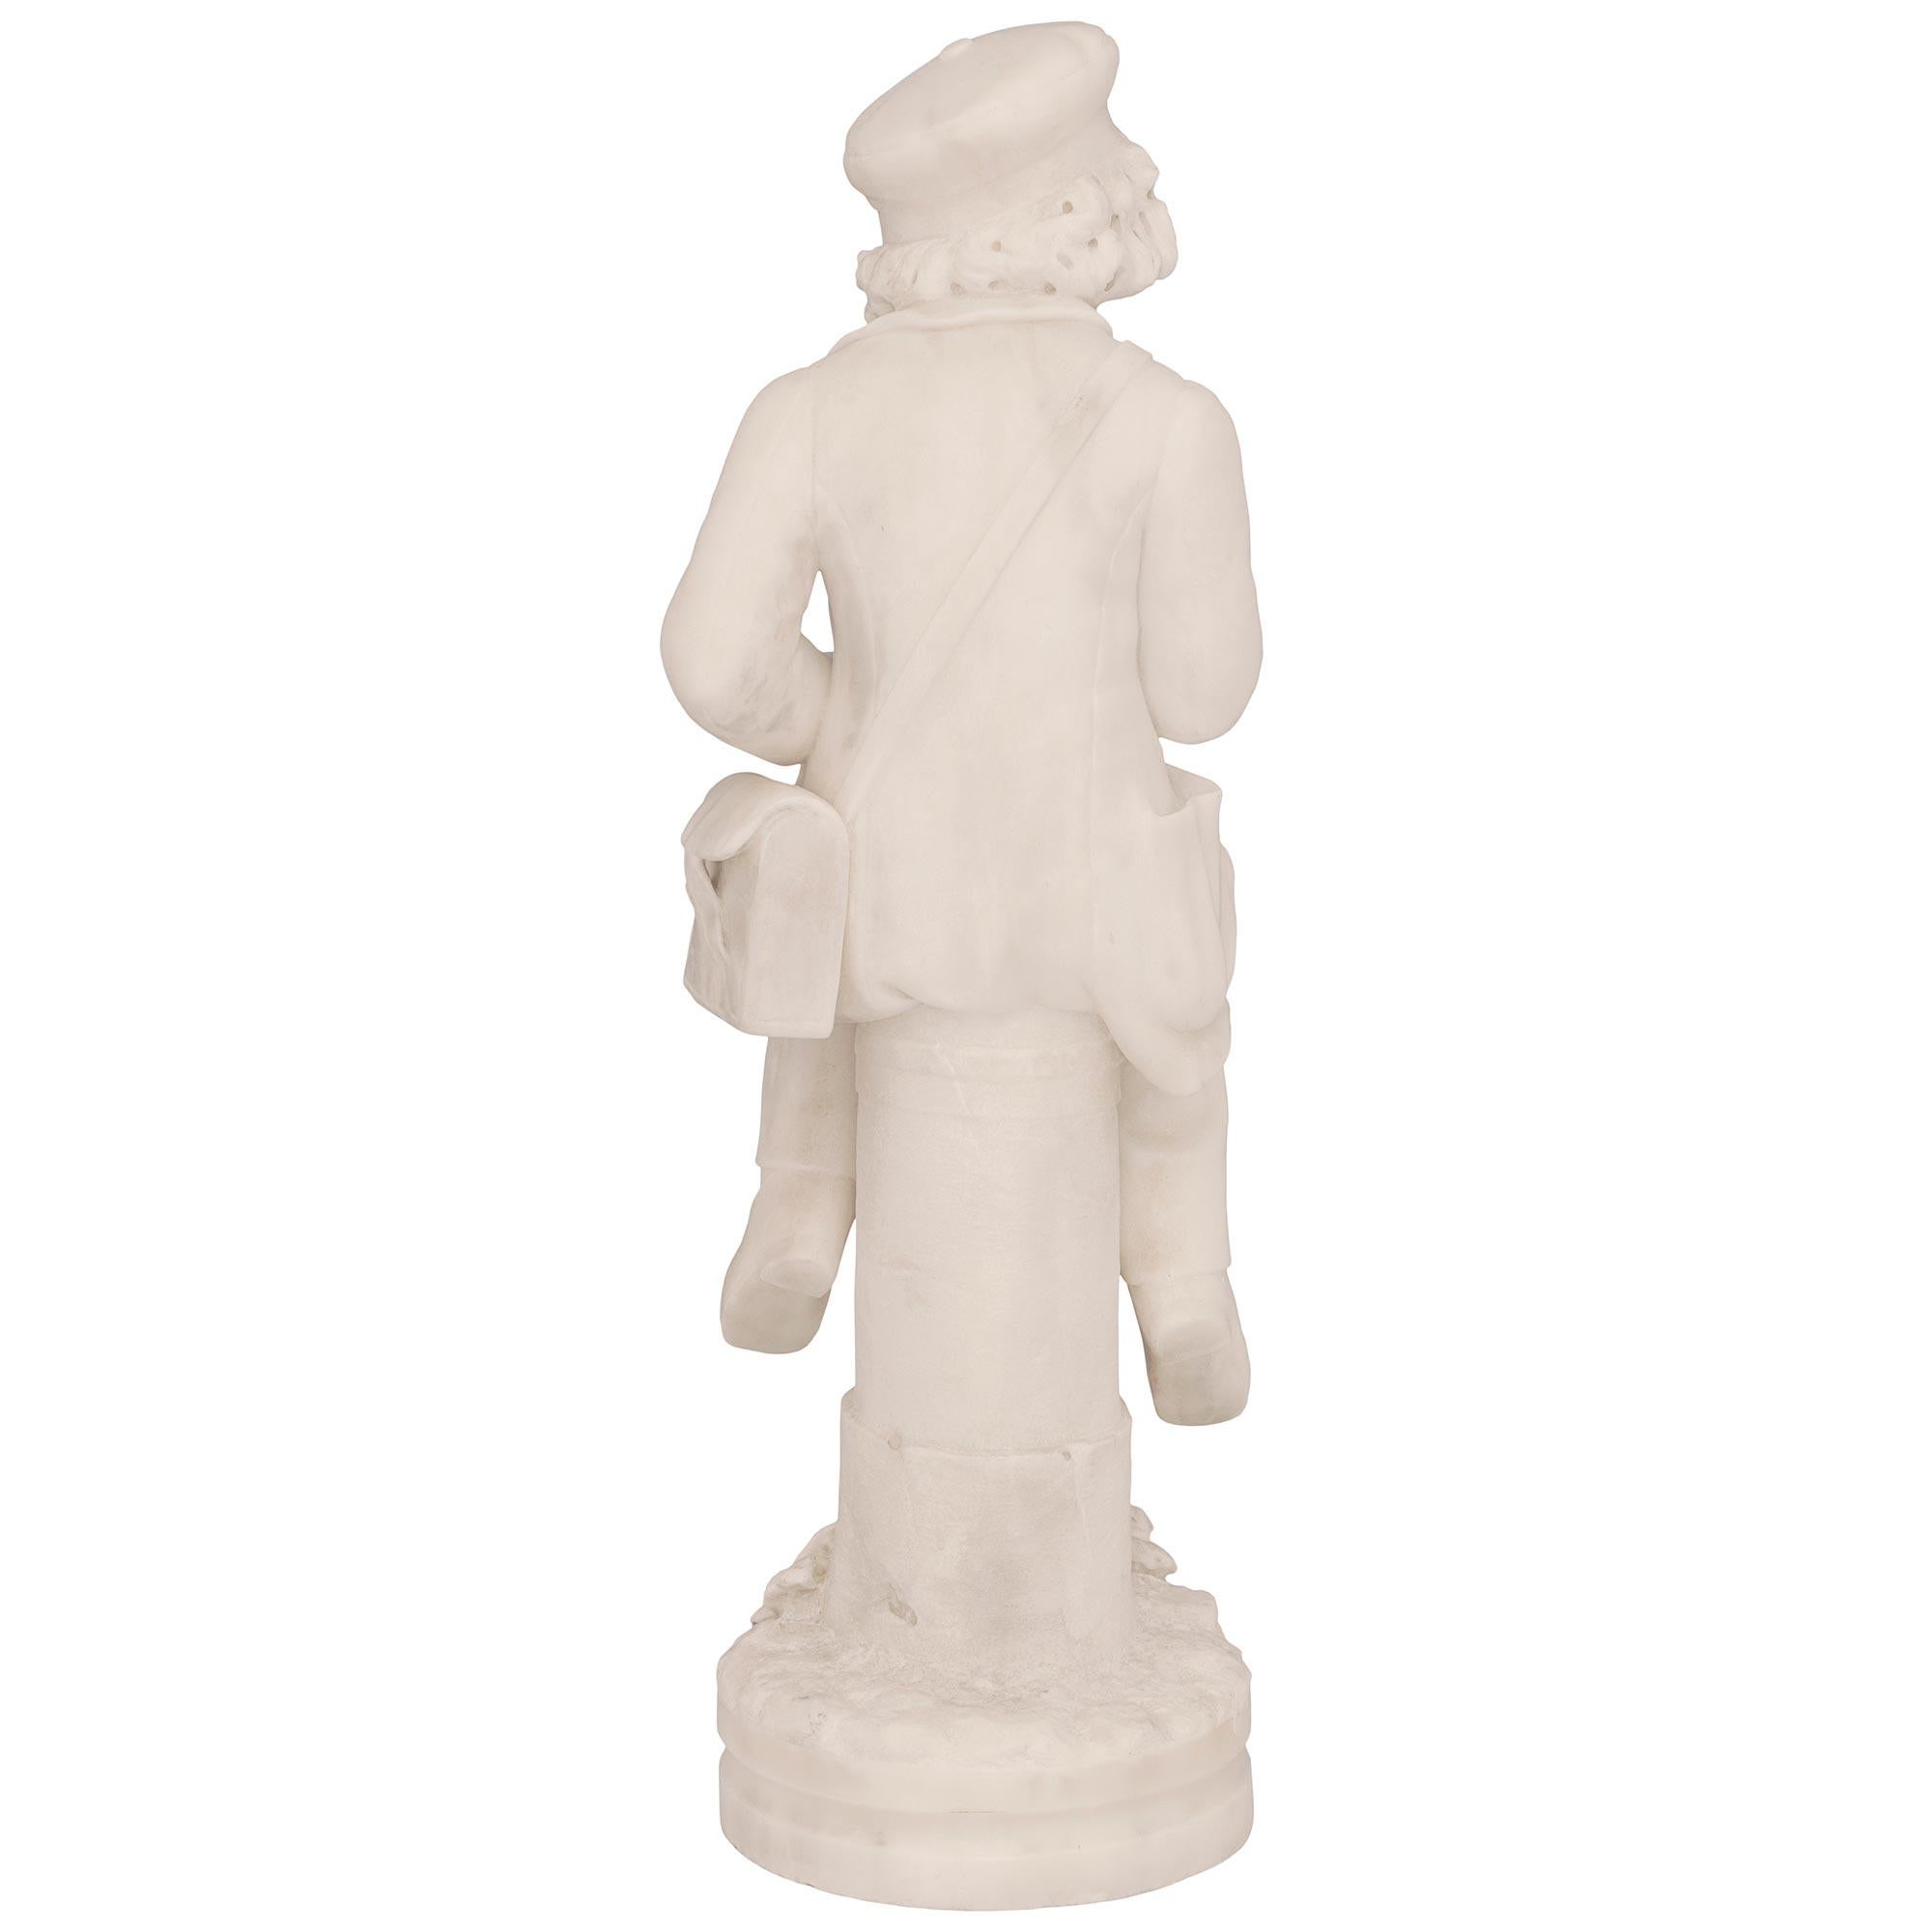 Italian 19th Century White Carrara Marble Statue of a Young Boy Reading a Book For Sale 6